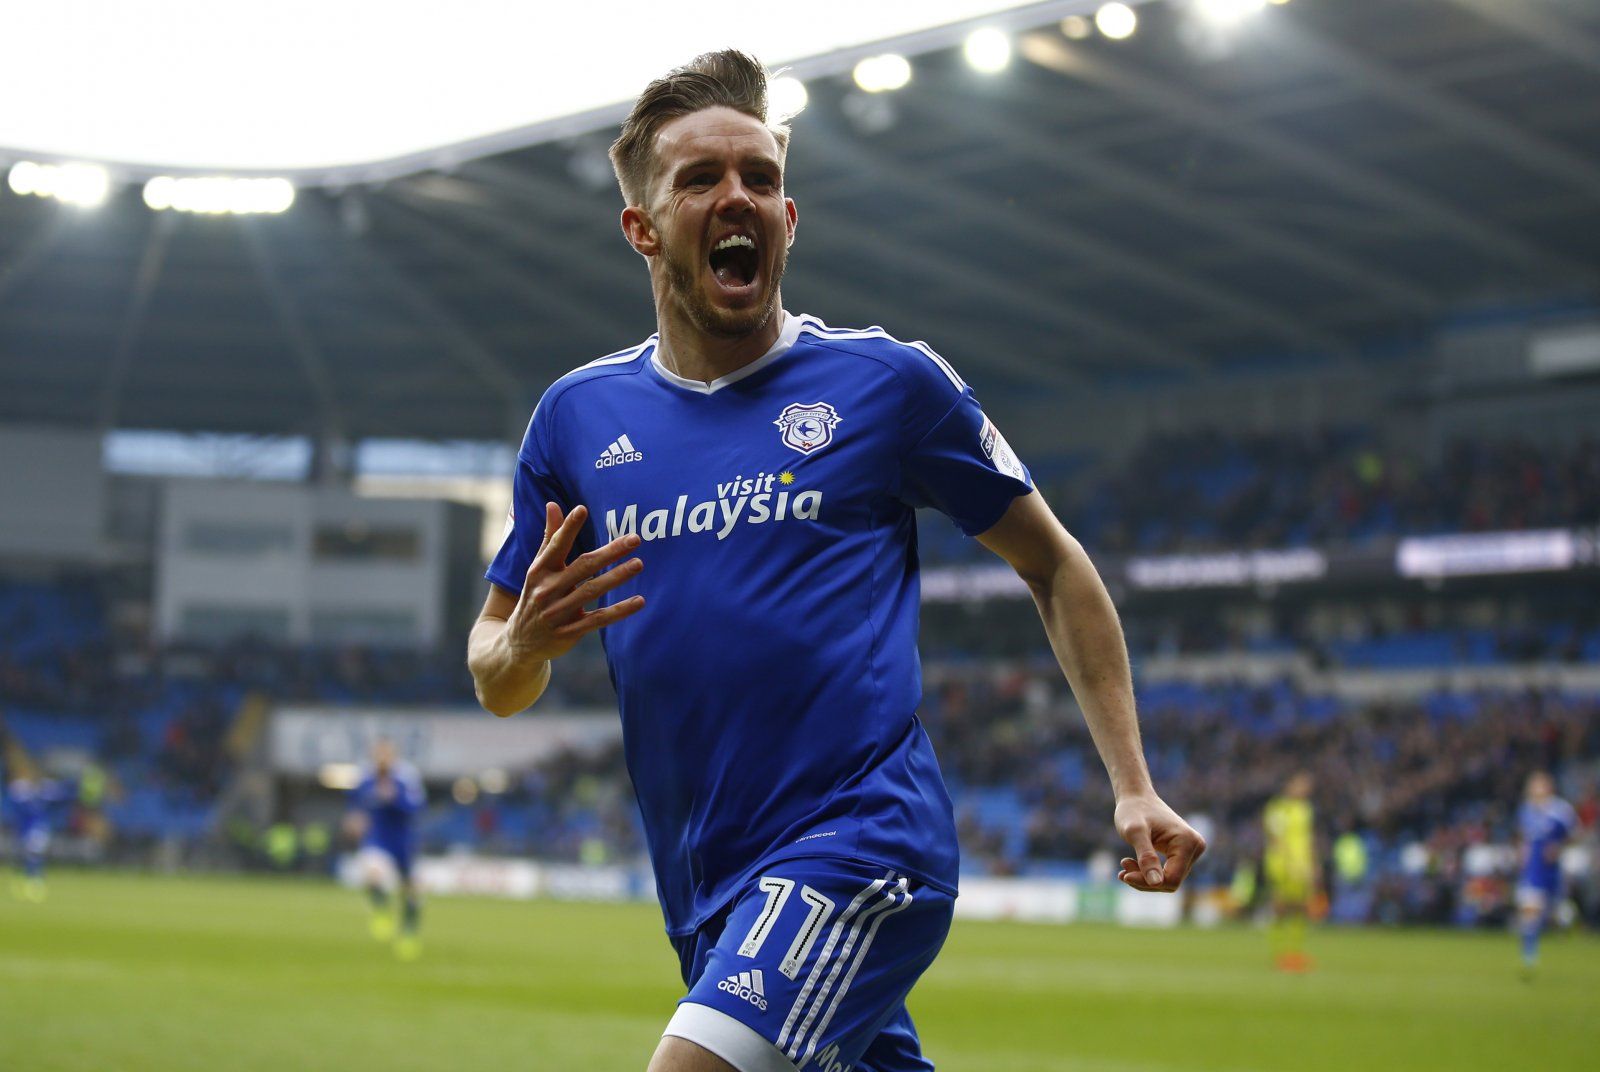 8 ex-Cardiff City players who we had no idea are still playing